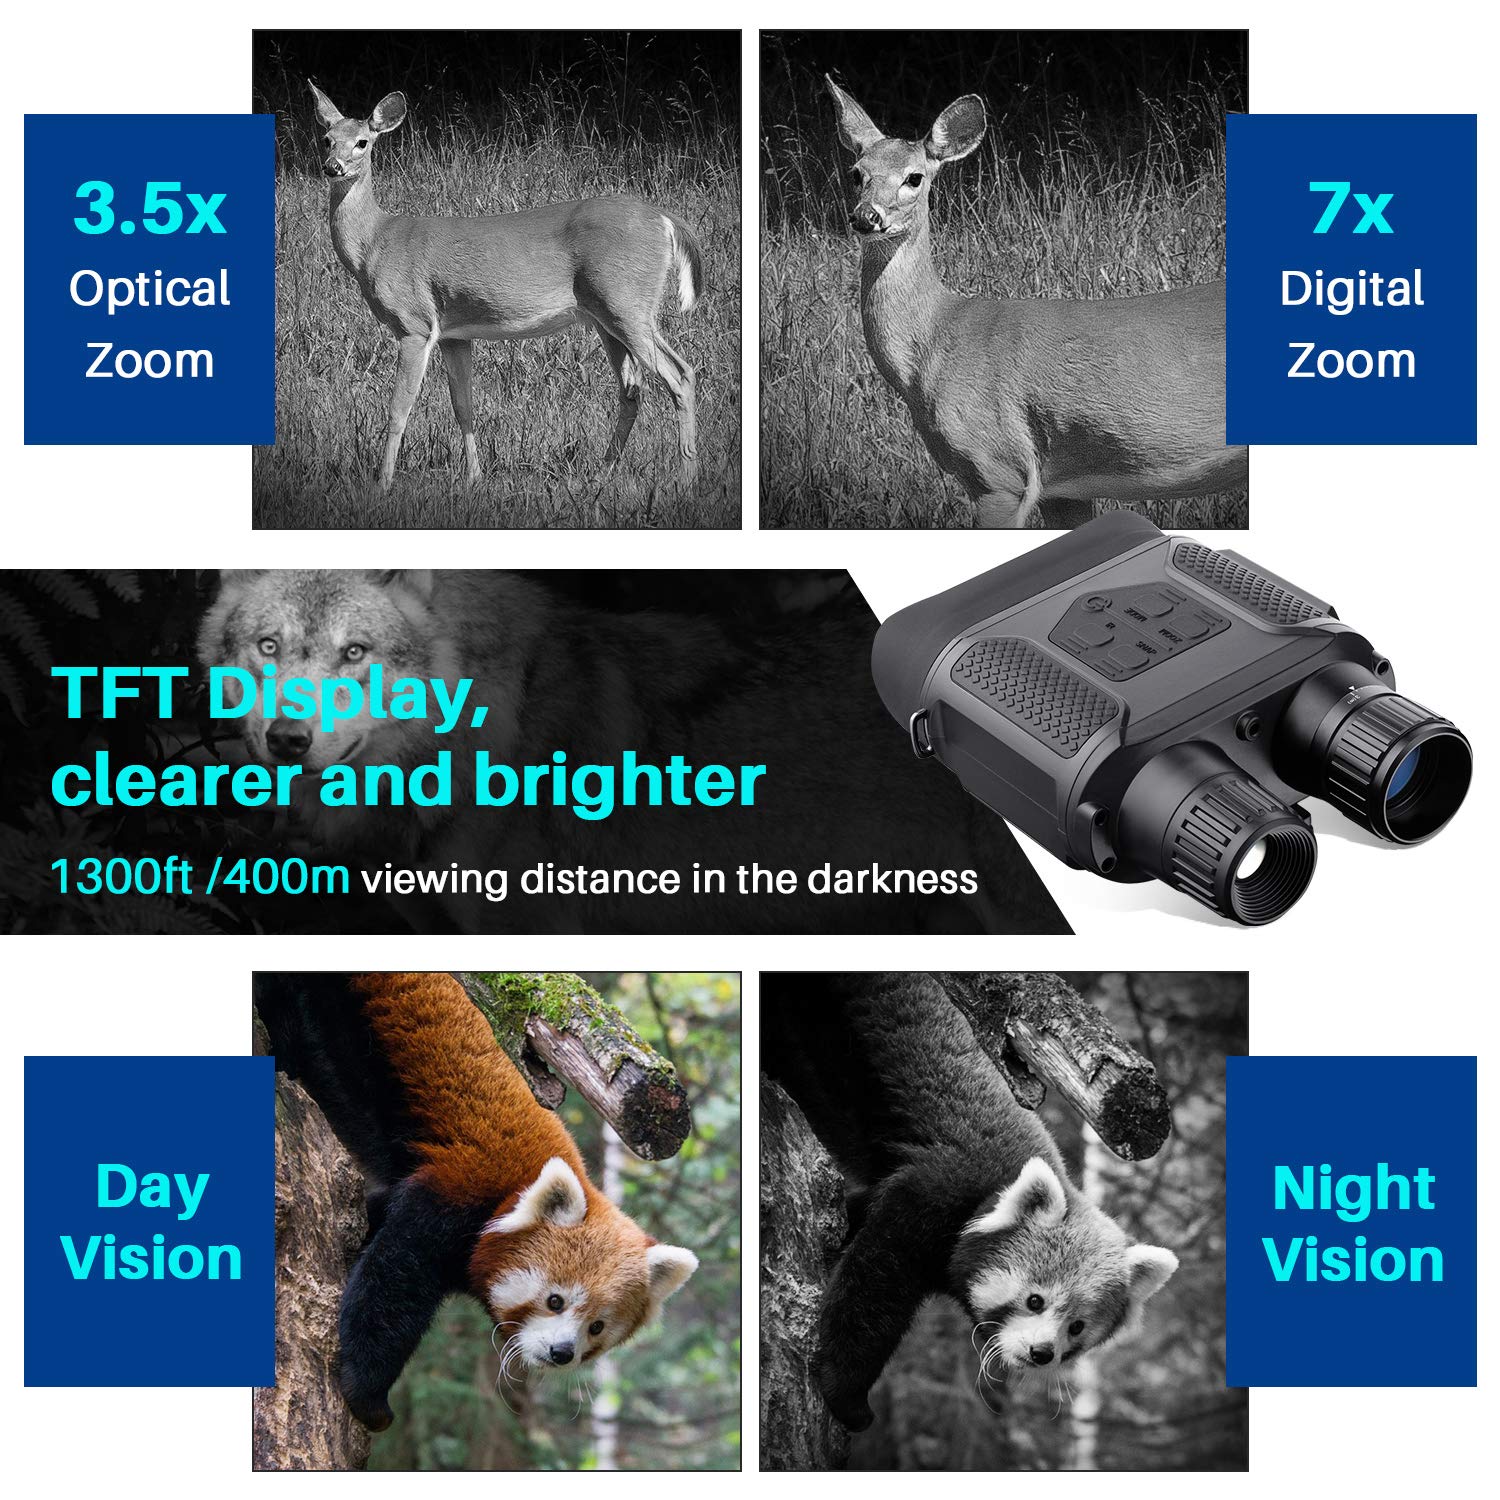 Digital Night Vision Binoculars for Complete Darkness with 7X Digital Zoom 32 GB Memory Card for Photo and Video Storage- Infrared Night Vision Goggles for Adults Night Hunting, Surveillance